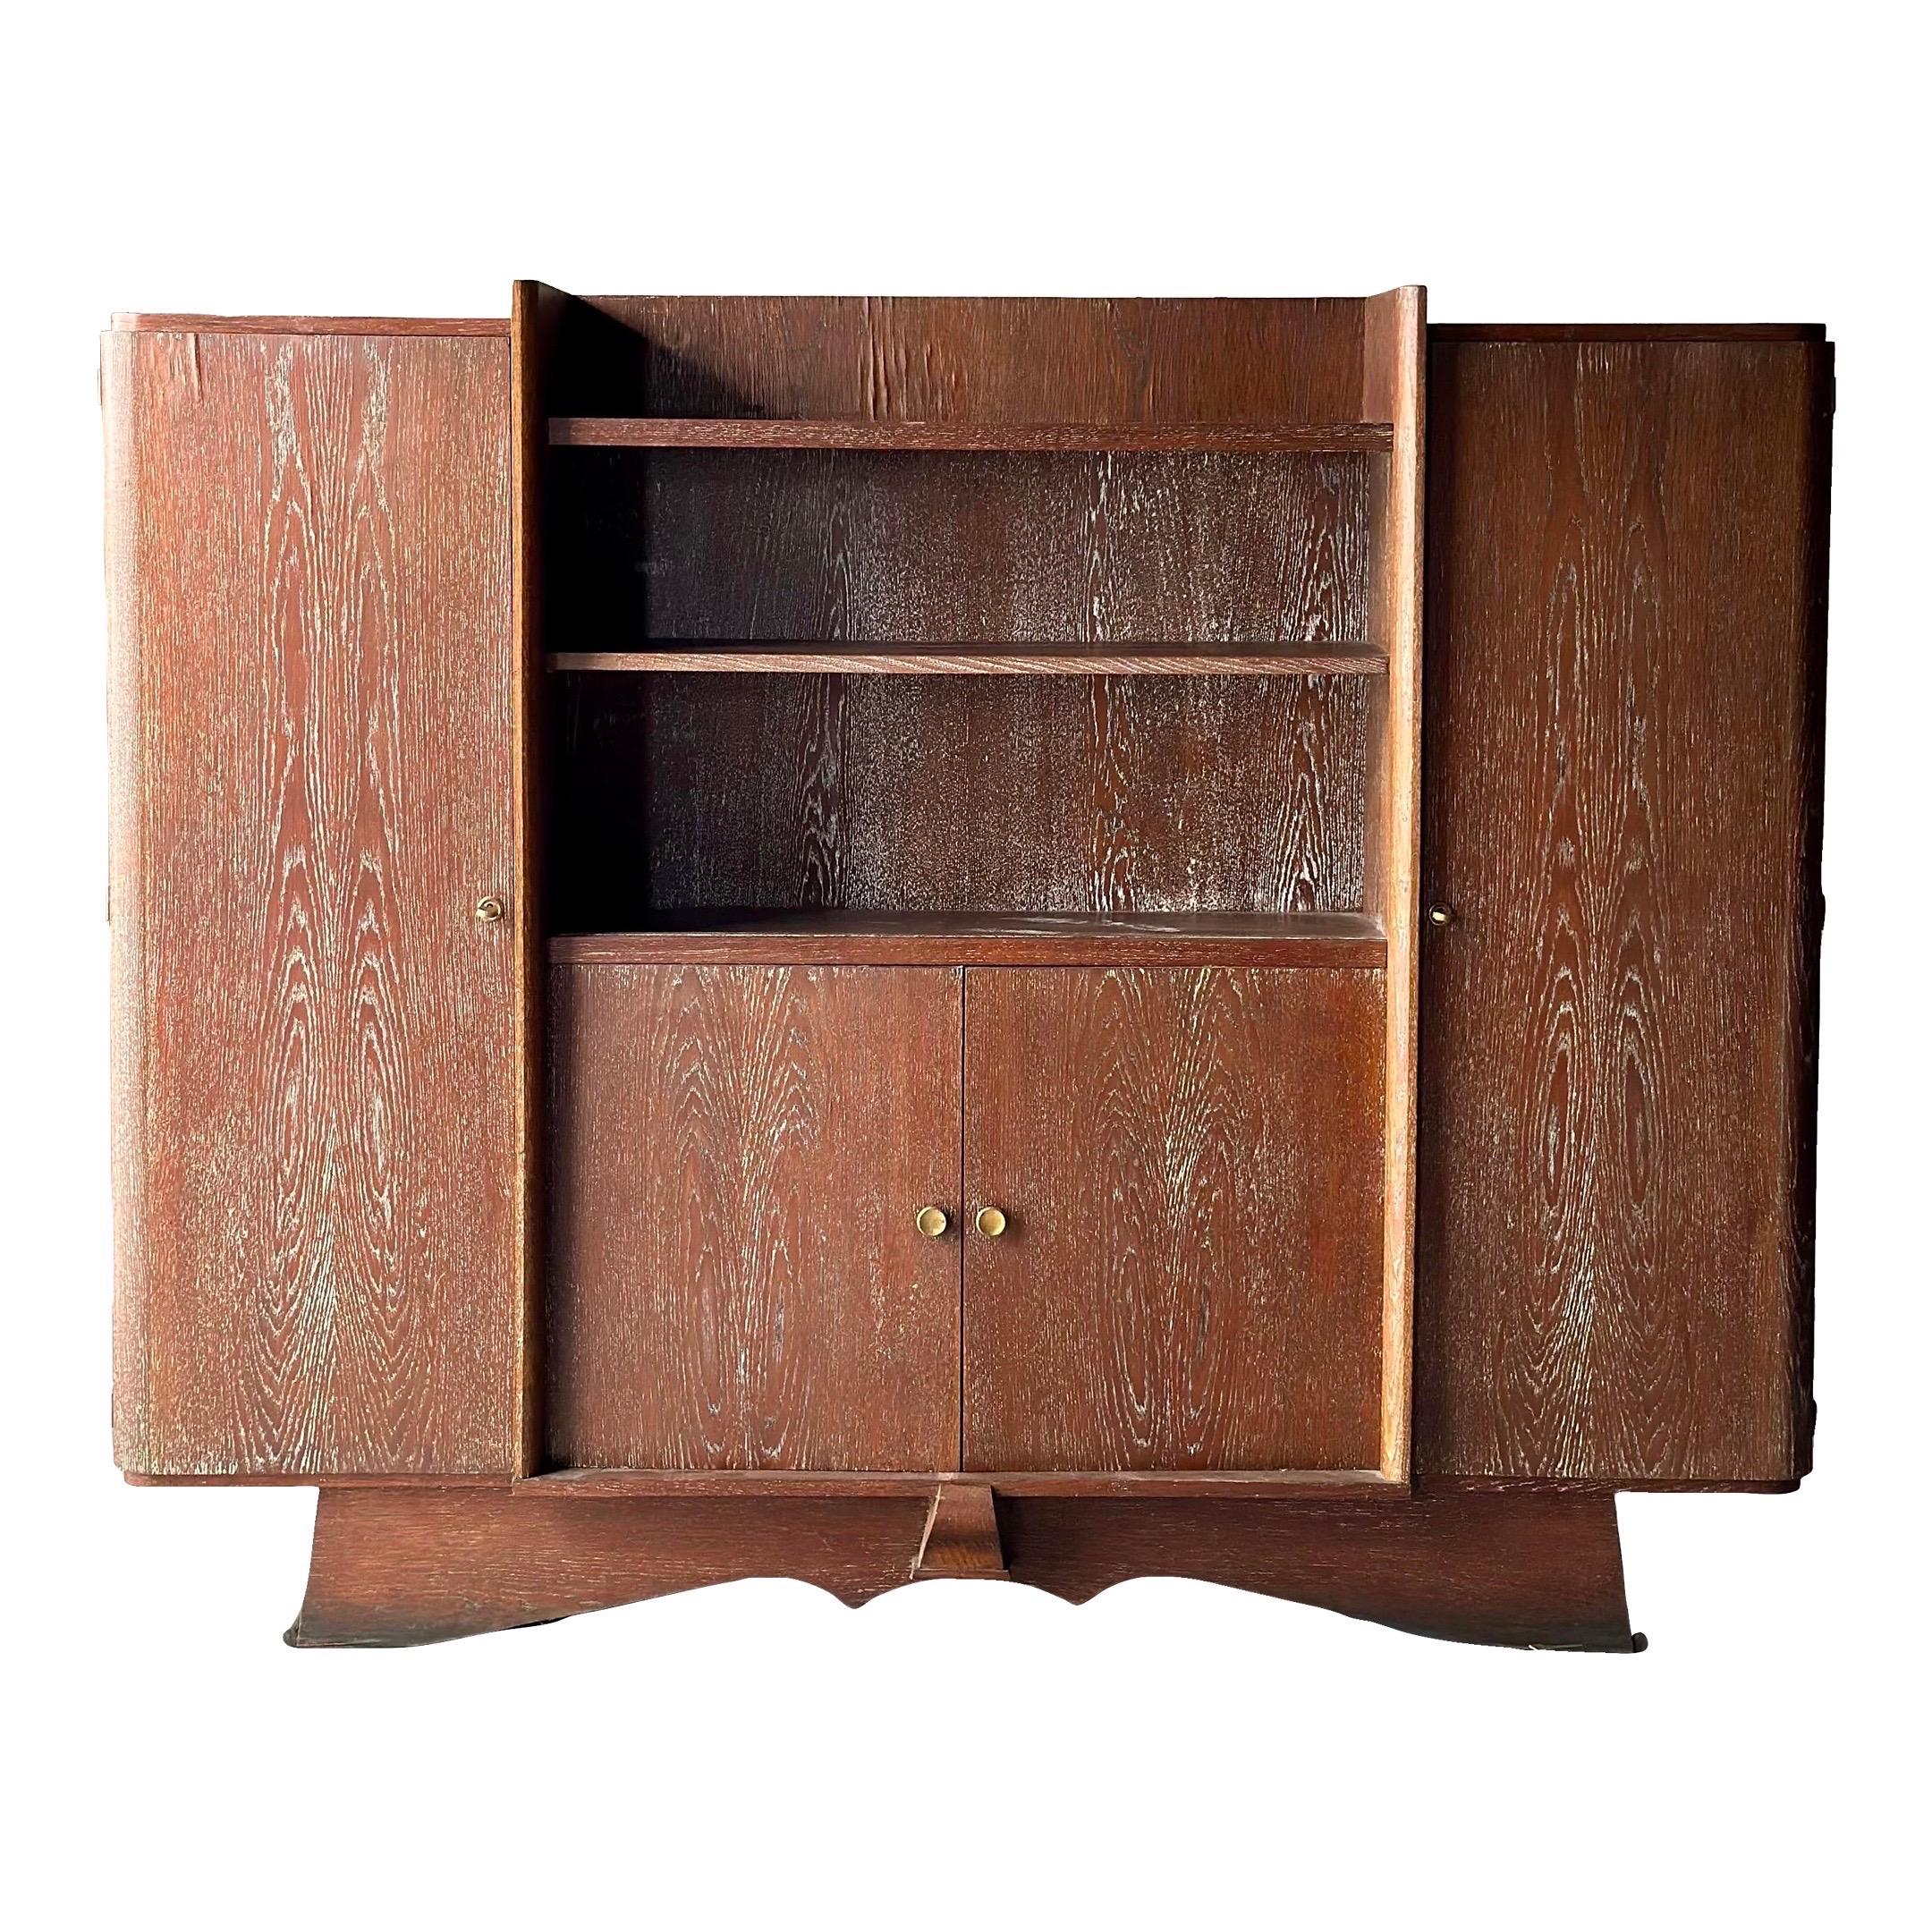 Djo Bourgeois Attr. Art Deco Period Cabinet For Sale